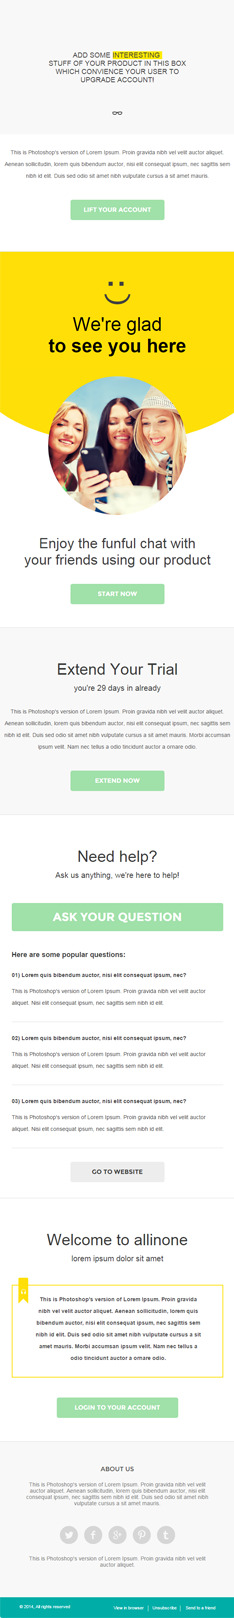 allinone second half responsive email notification templates